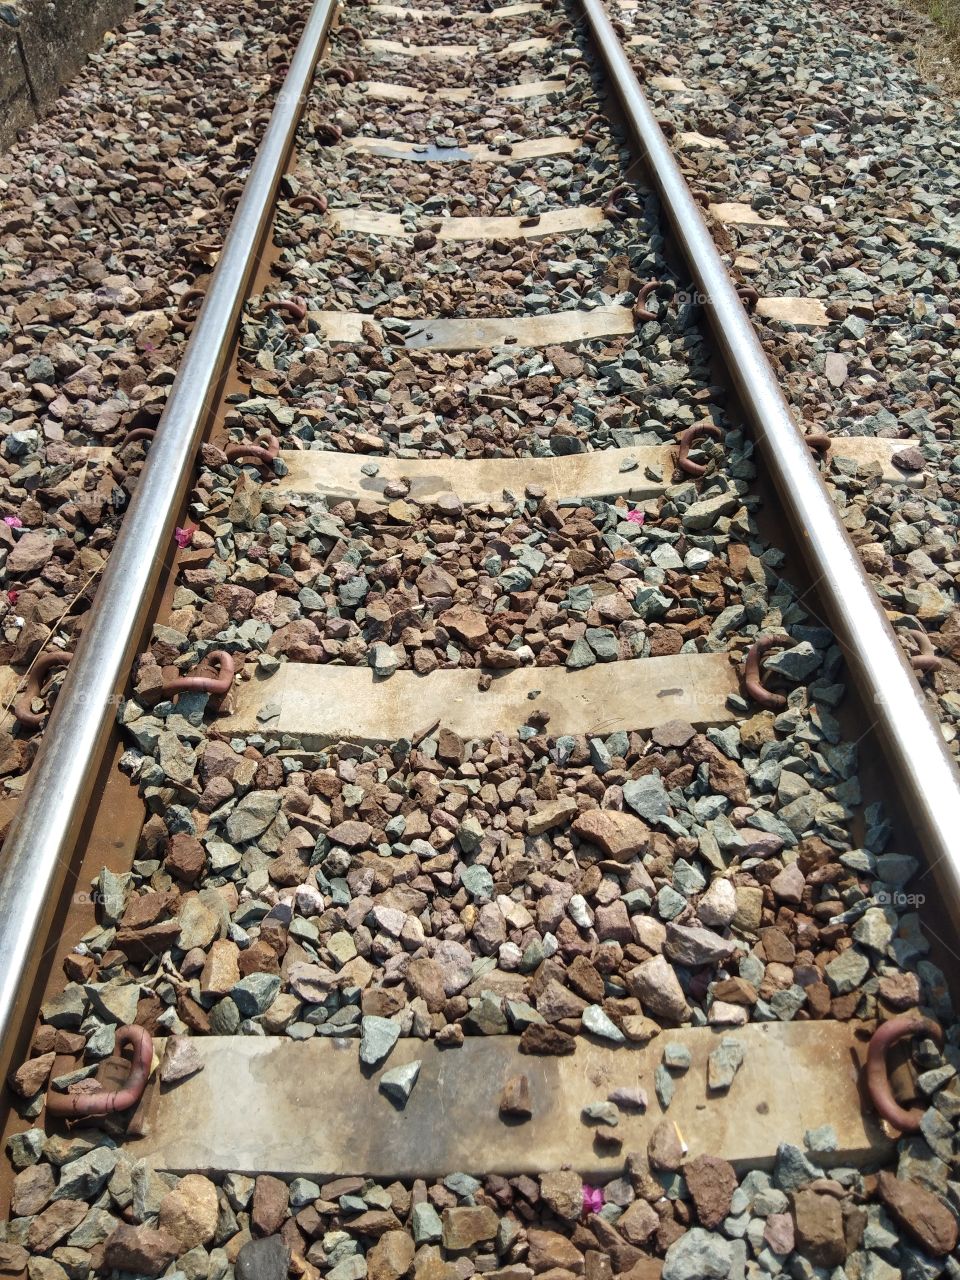 Straight lines parallel of the metal railway on the gravel floor.